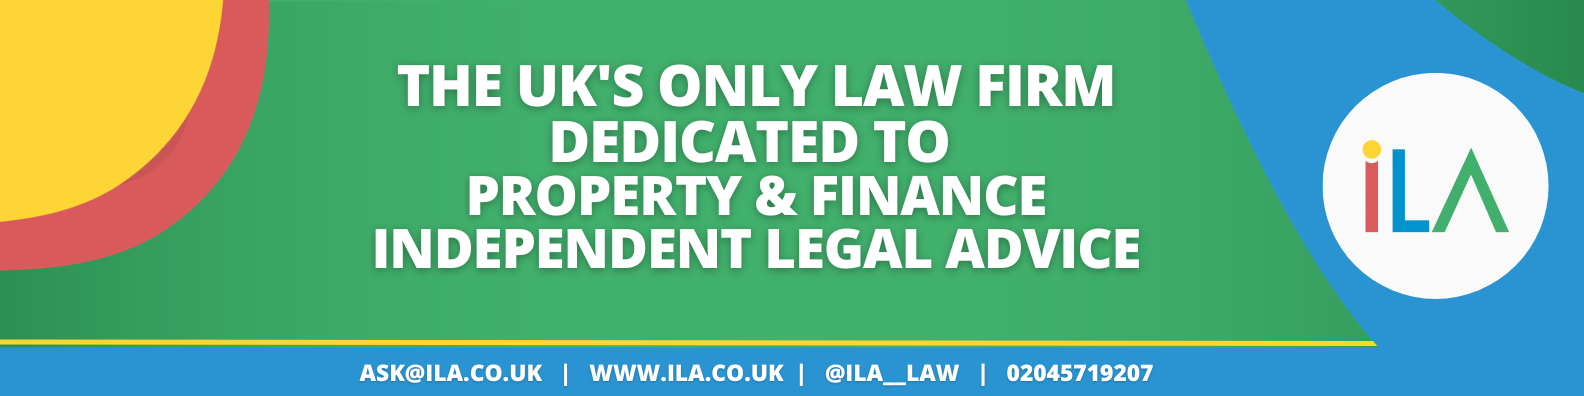 iLA - UK solicitors specialising in independent legal advice for banking, finance, specialist lending and property related documents